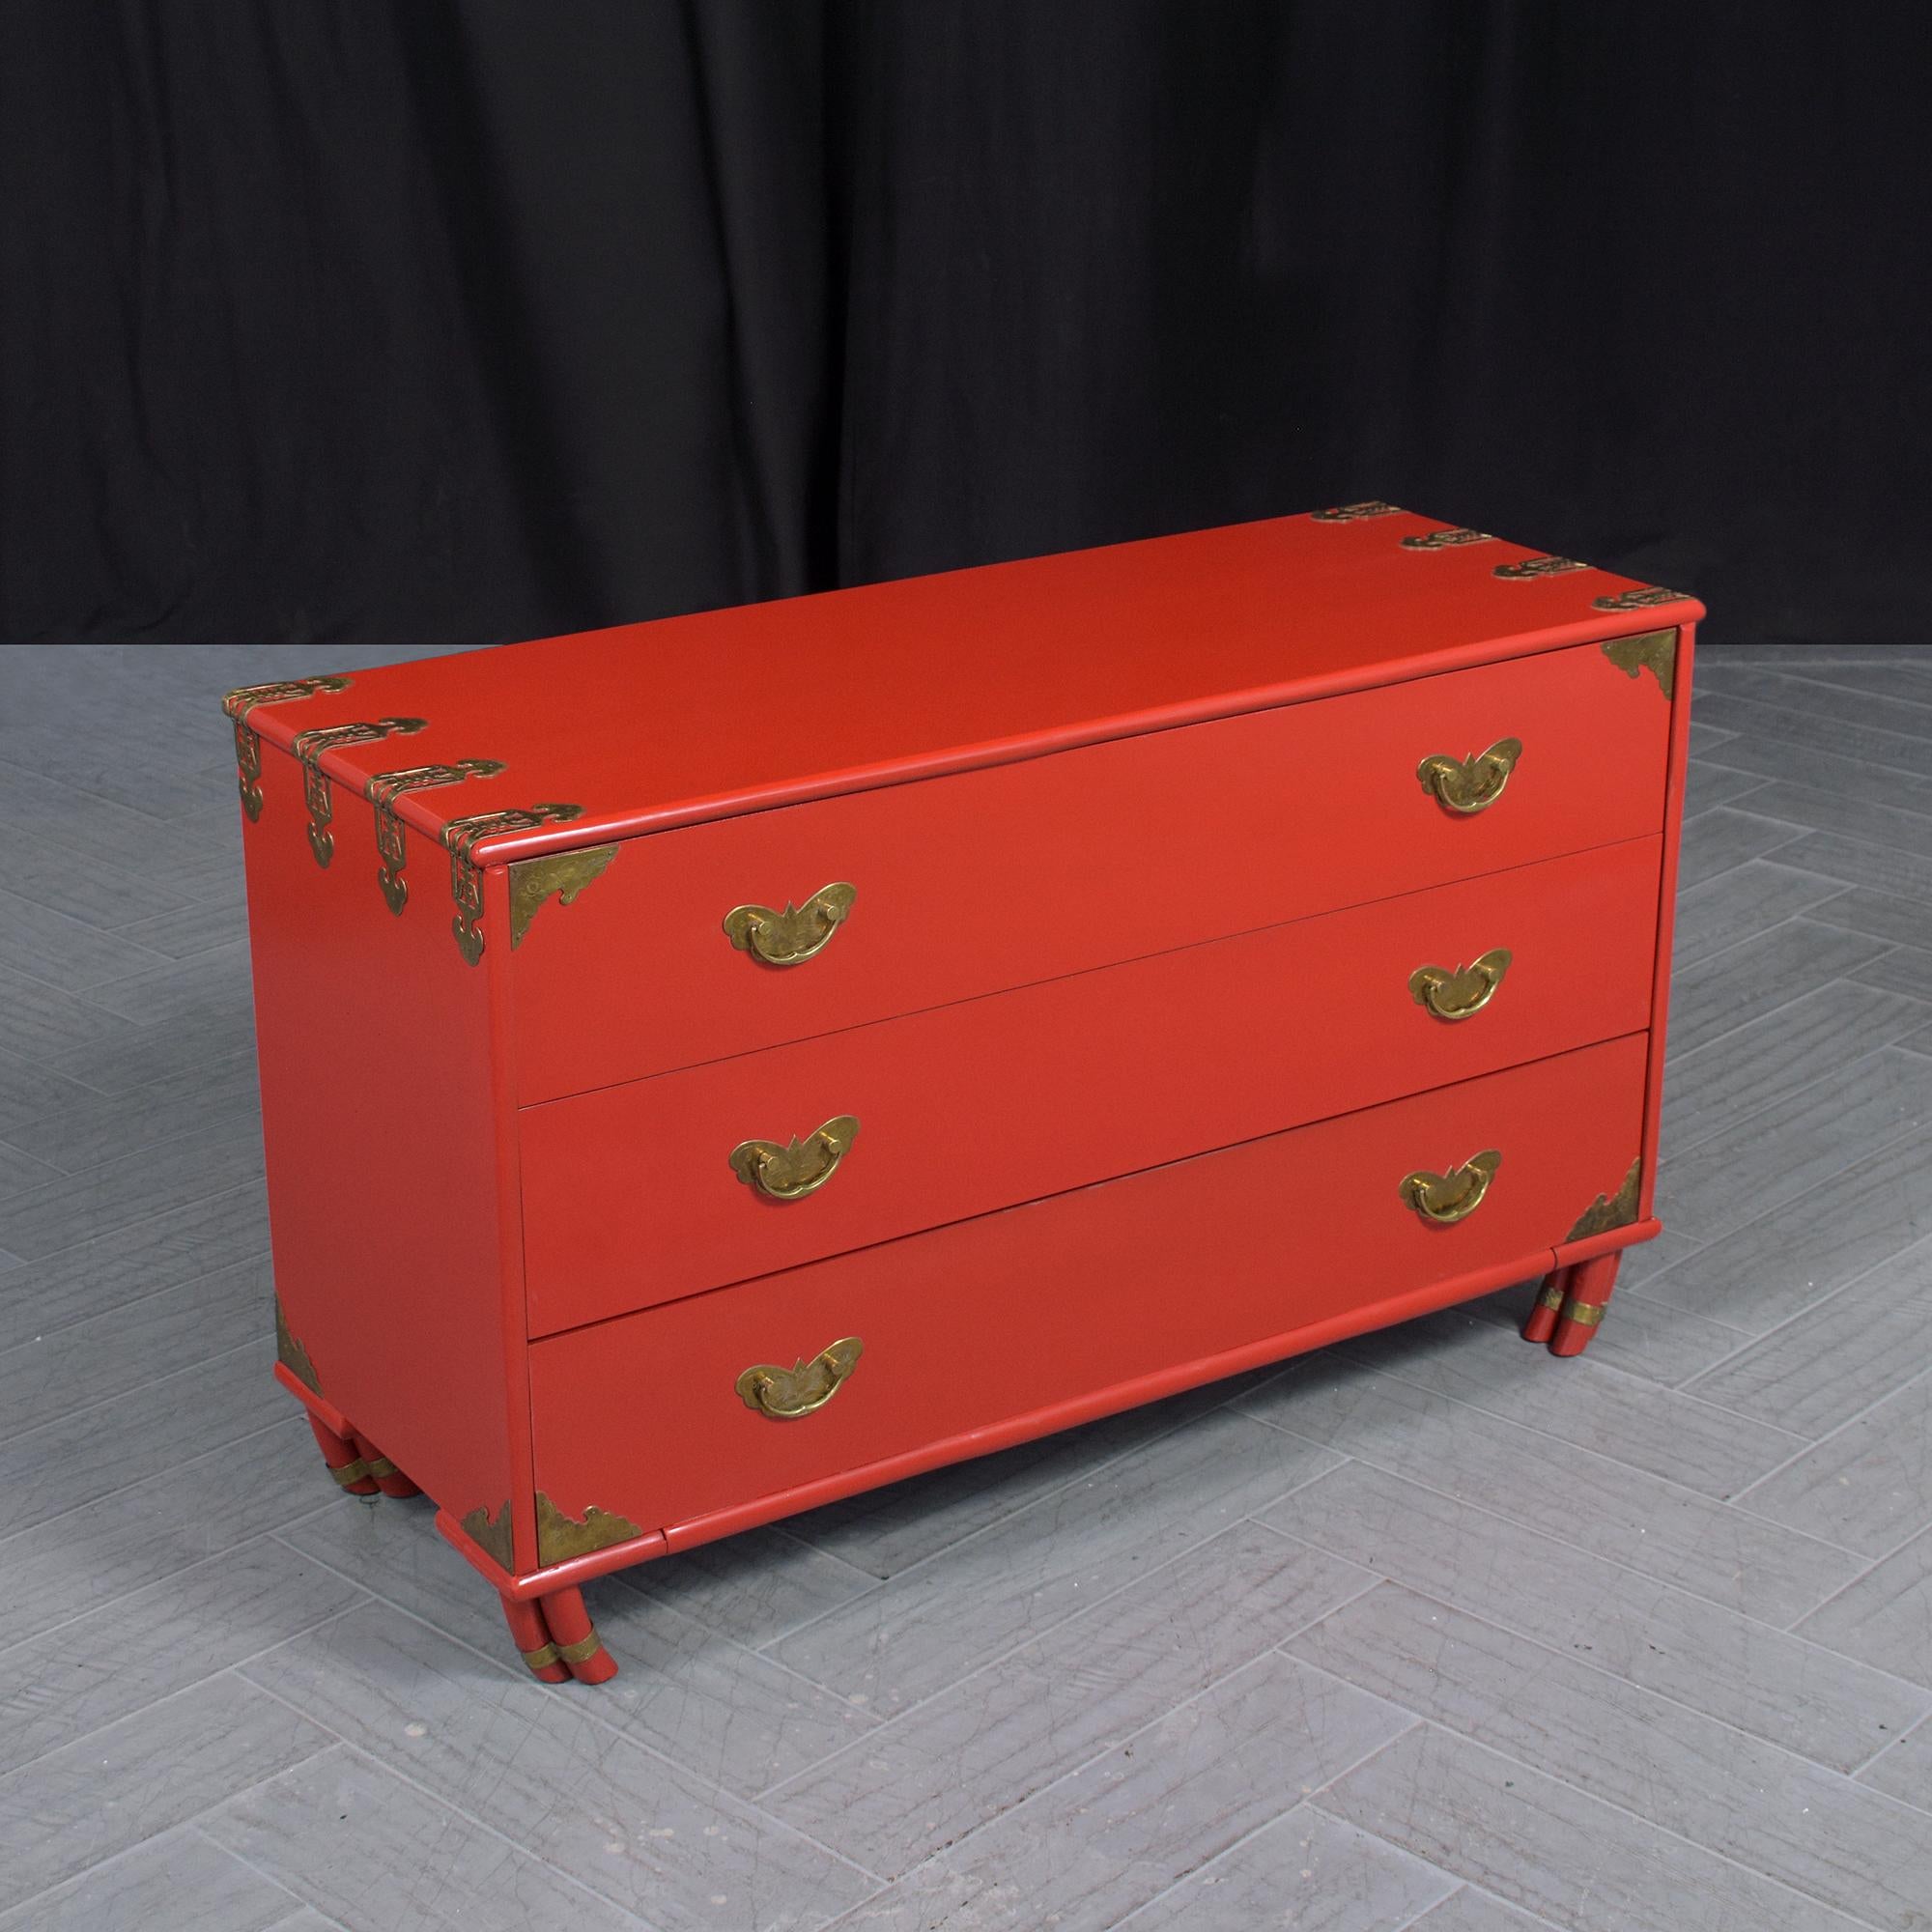 Paint Stunning Vintage 1970s Red Lacquered Chest of Drawers with Brass Accents